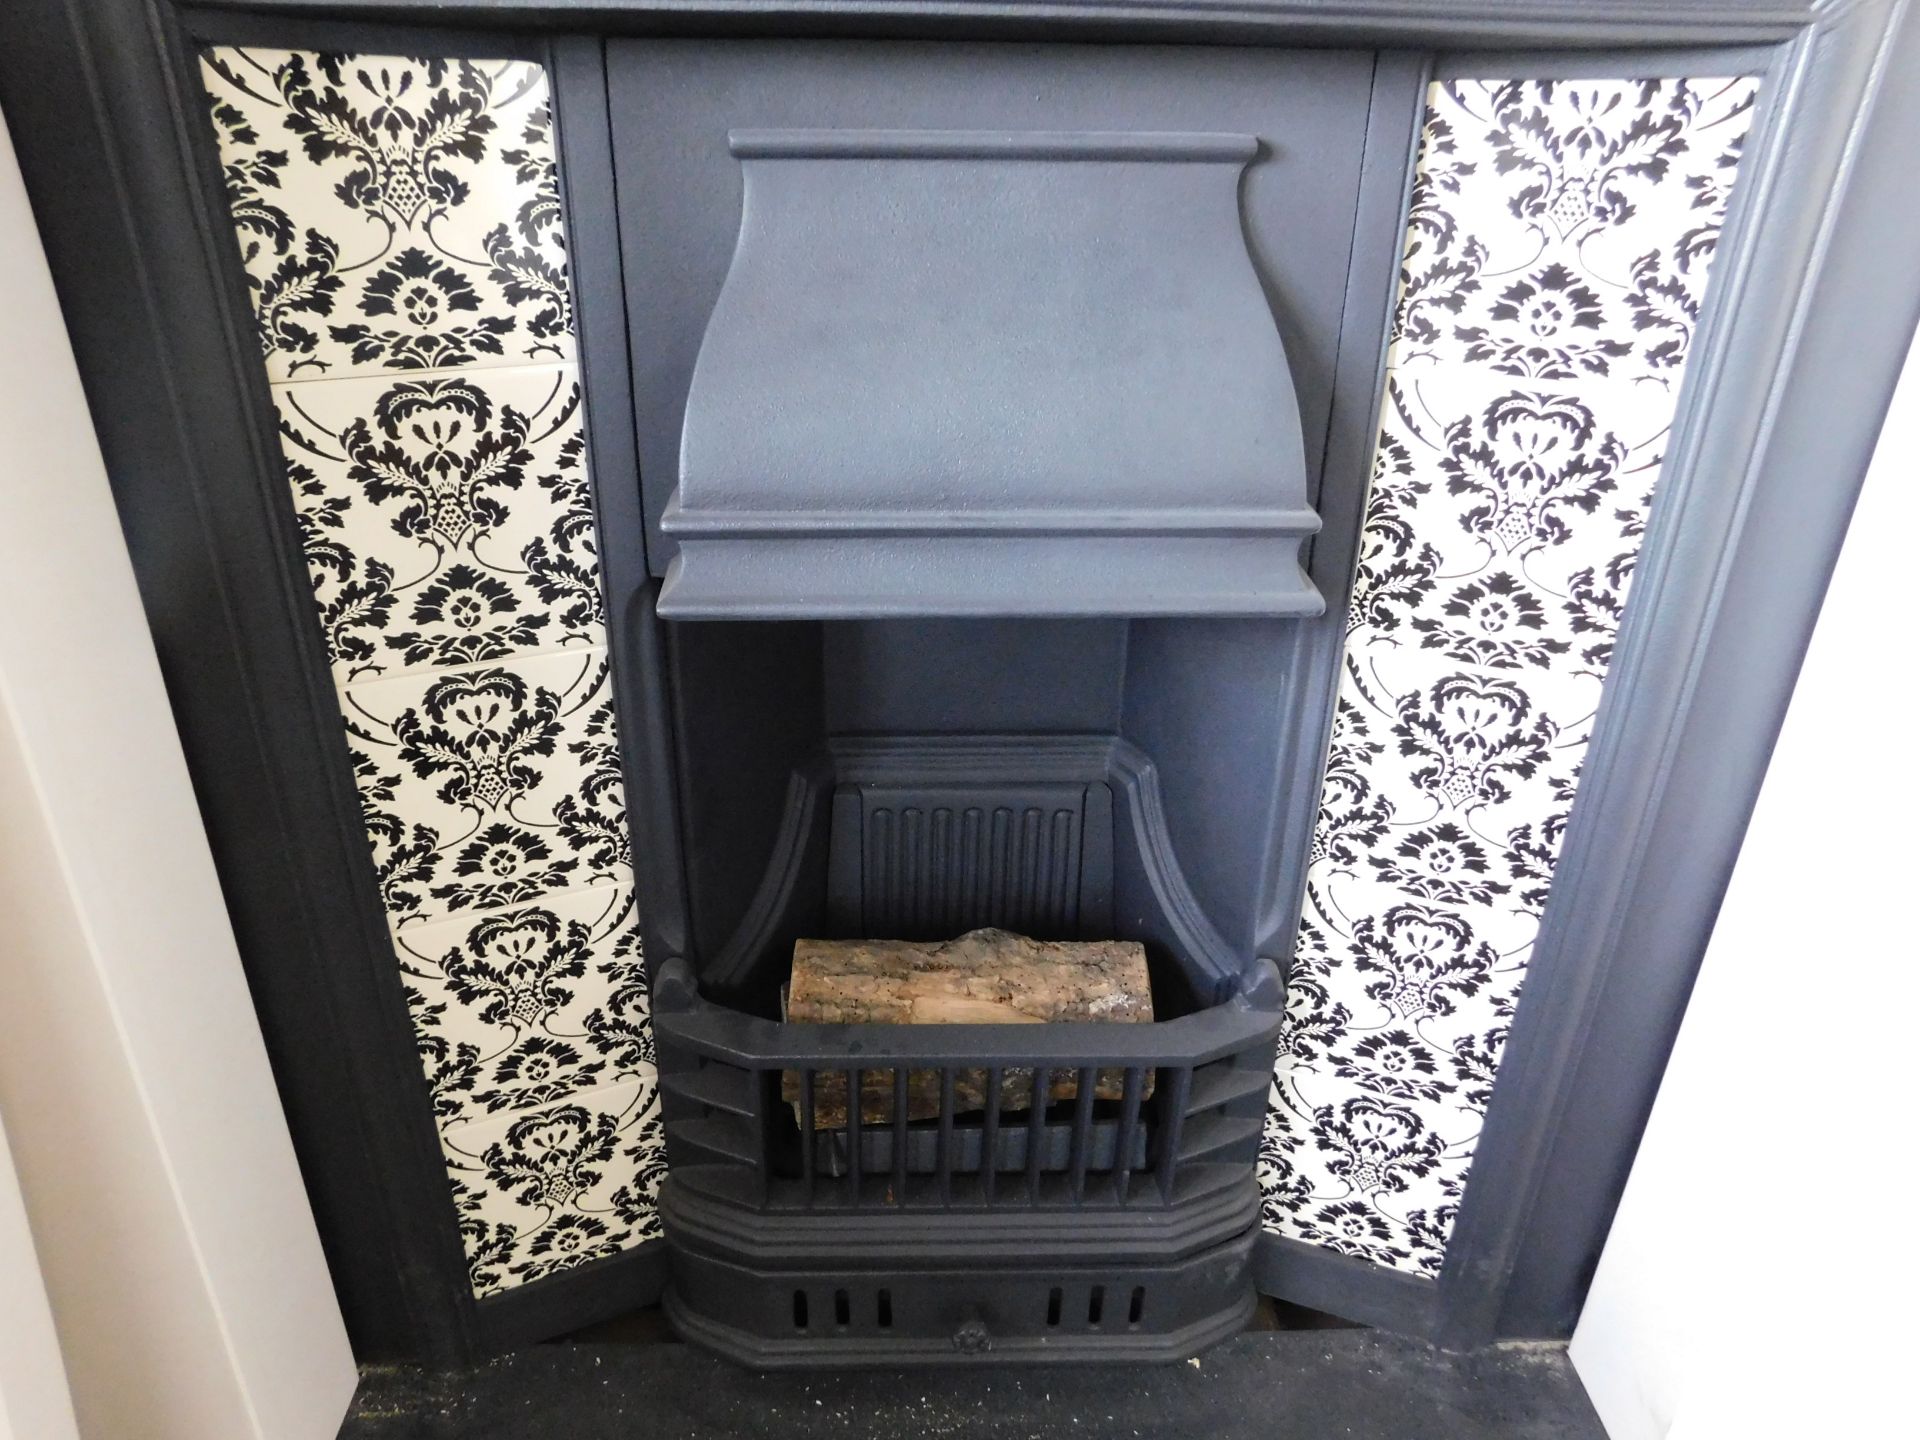 Ex-Display 54” Victorian Style Bedroom Fireplace with Marble Effect Surround (Where the company’s - Bild 2 aus 2